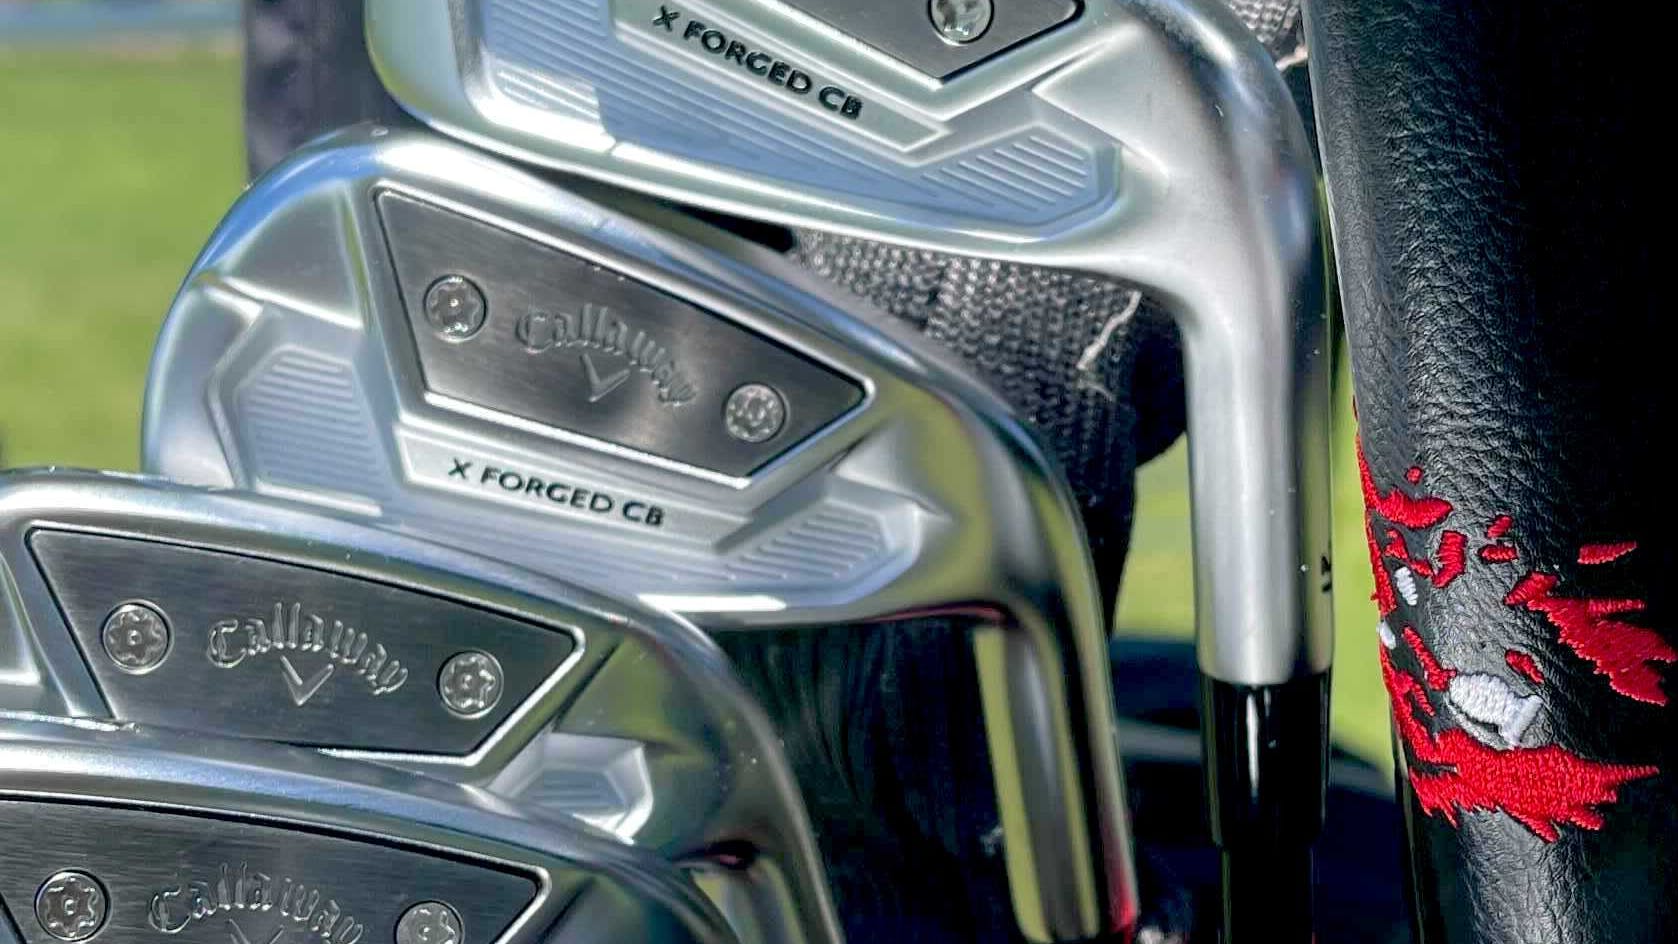 Curated Expert Jason Hester's photo of the Callaway X Forged CB Irons.